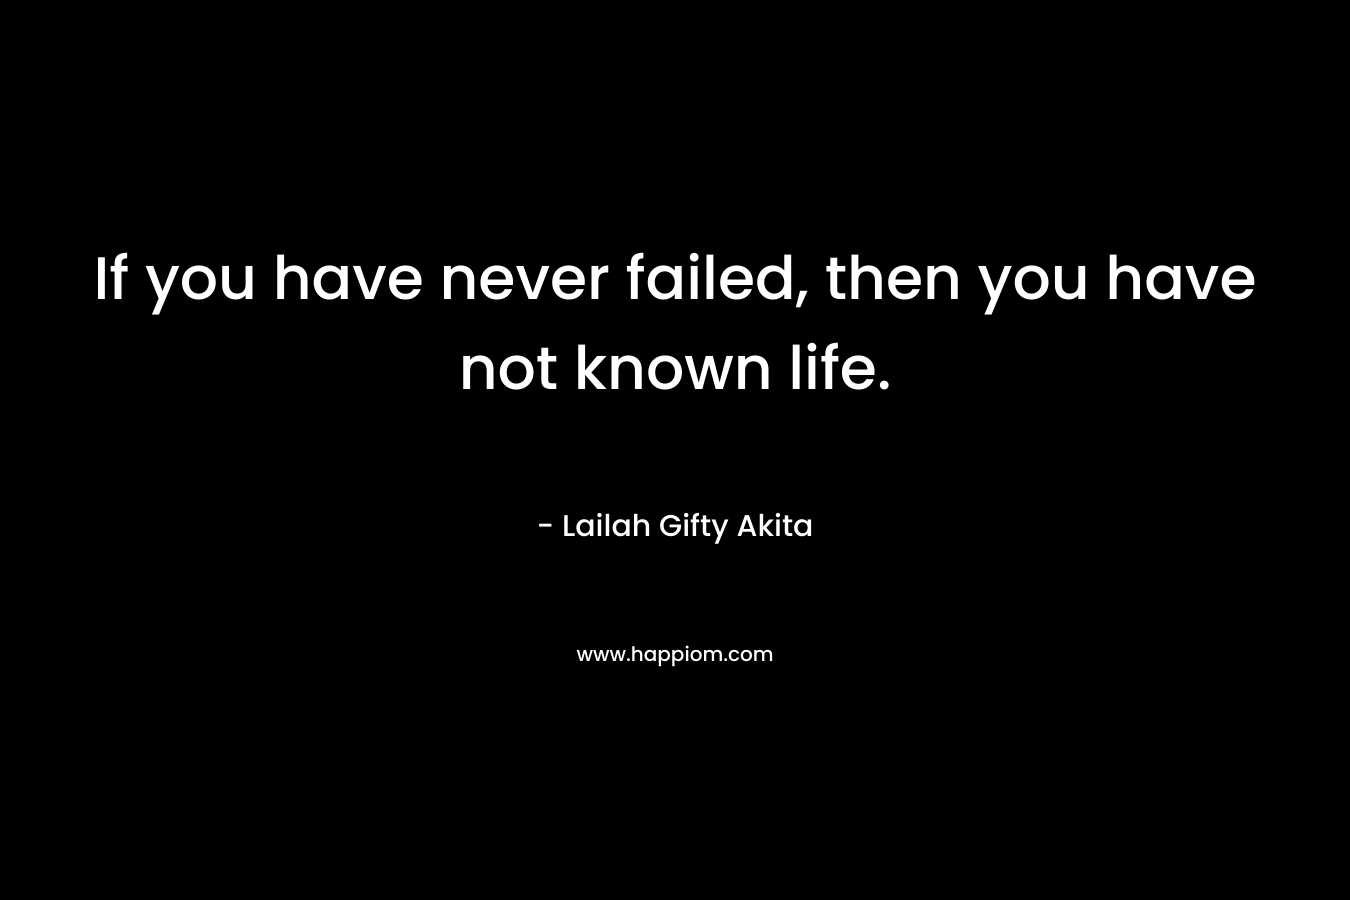 If you have never failed, then you have not known life.